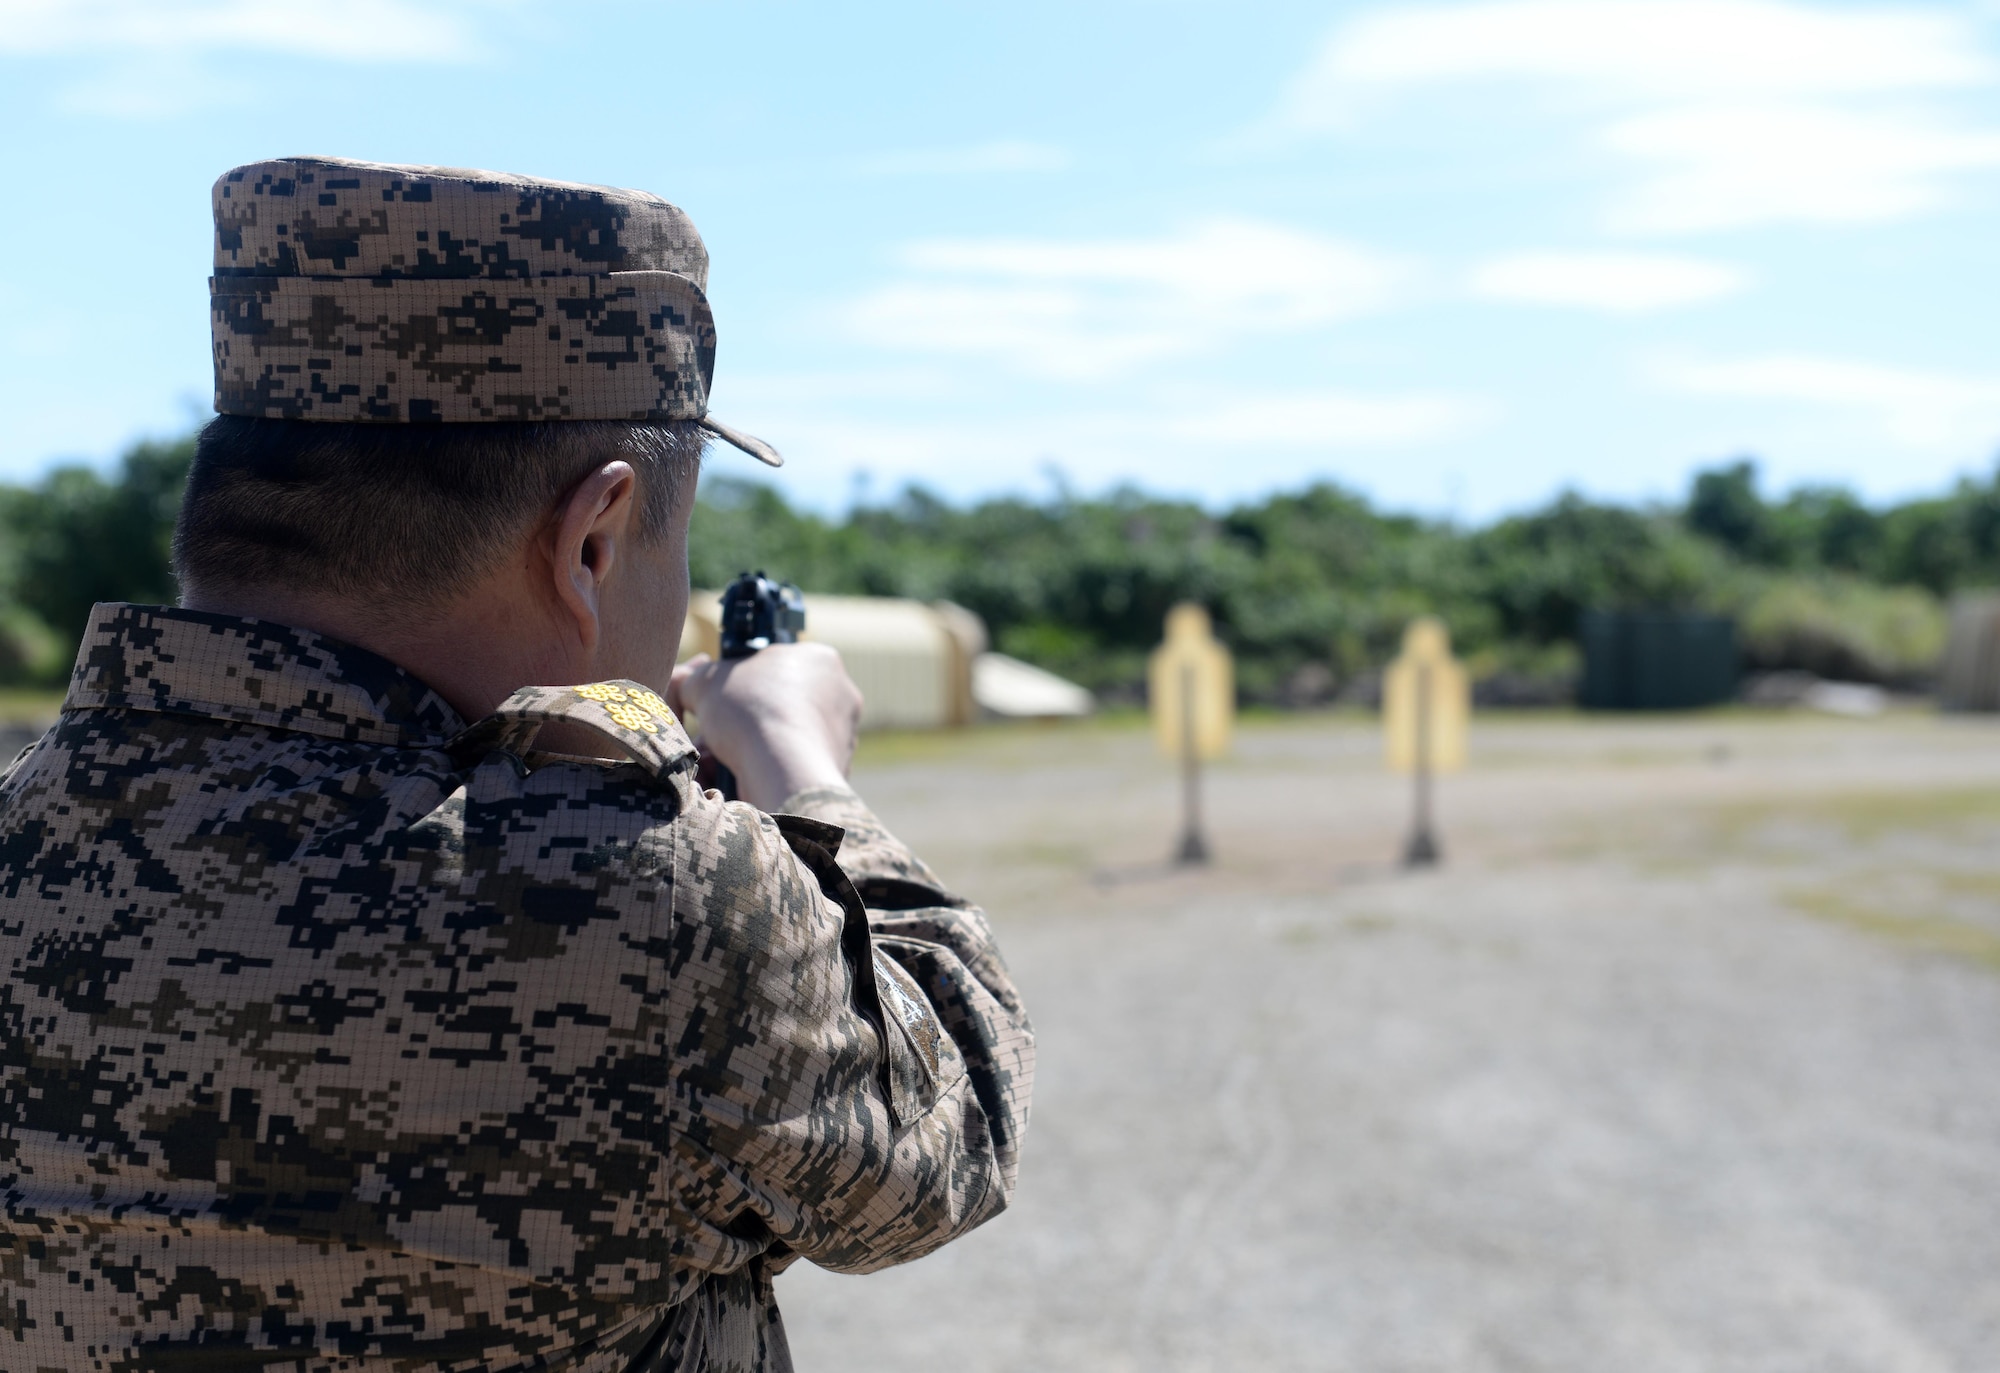 A Mongolian Air Force service member aims a M9 Beretta during the firing portion of Pacific Defender 17-1, April 11, 2017, at Andersen Air Force Base, Guam. Pacific Defender, is designed to establish integrated defensive cooperation with Indo-Asia-Pacific nations, while promoting regional stability and military relations. (U.S Air Force photo by Airman 1st Class Gerald R. Willis/Released)